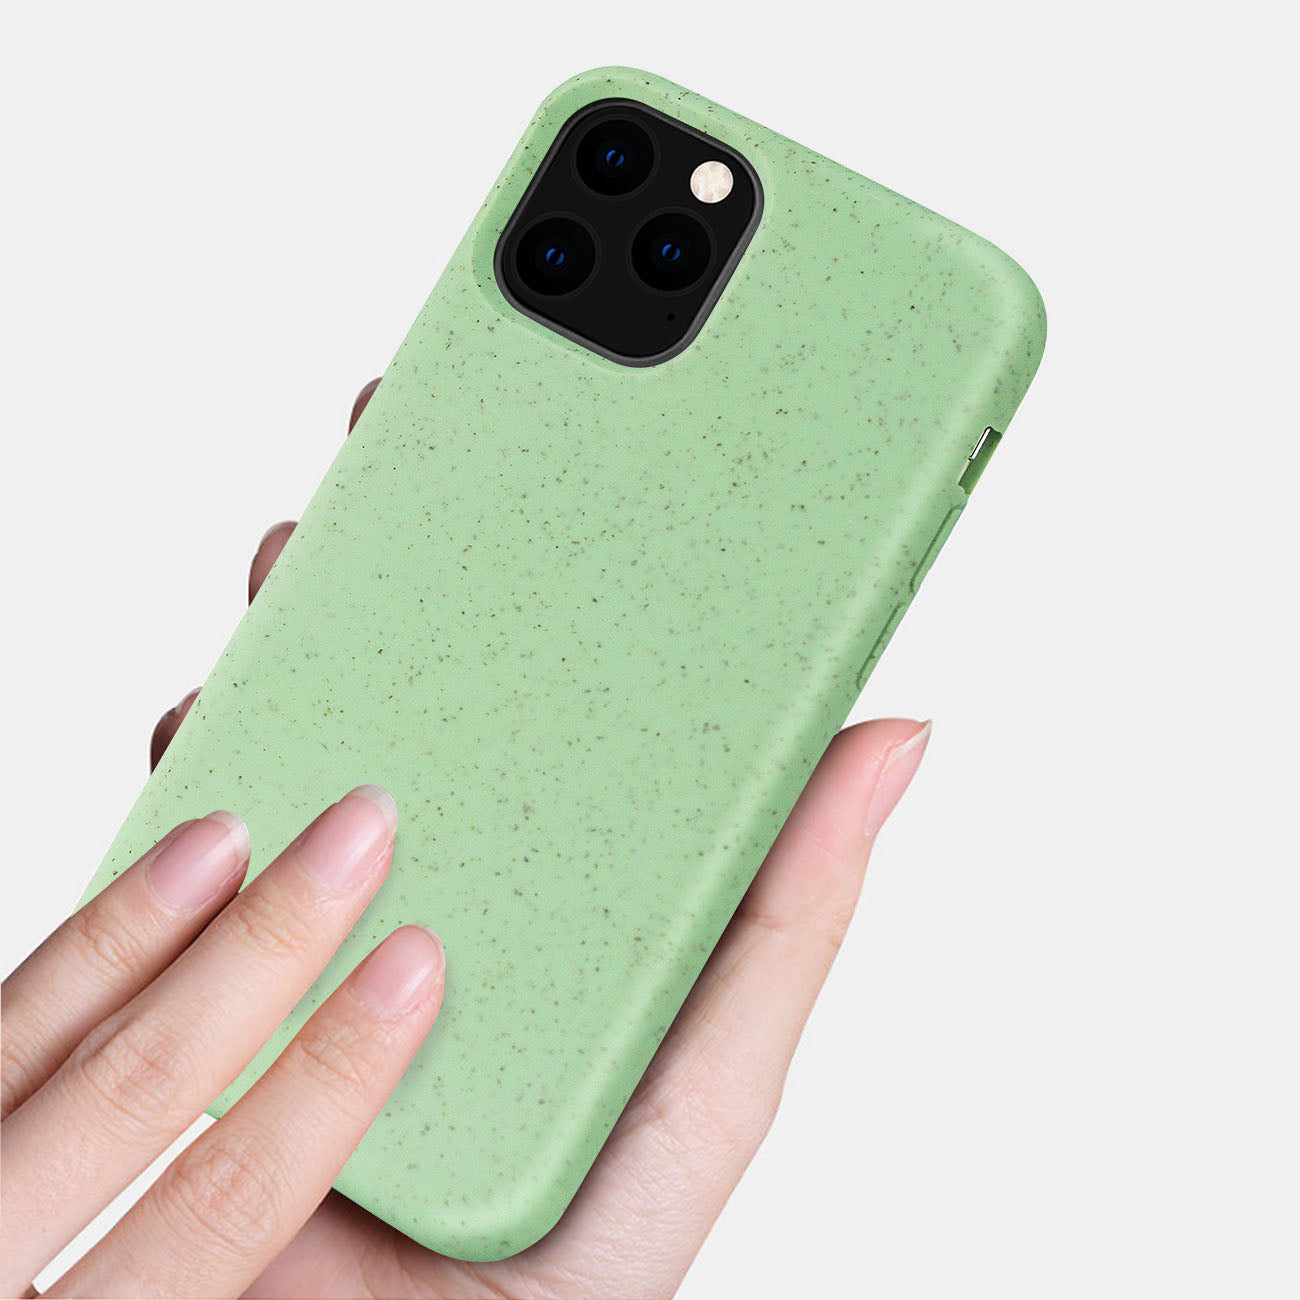 Phone Case Silicone Wheat Bran Material Apple iPhone 11 Pro Max Green Color